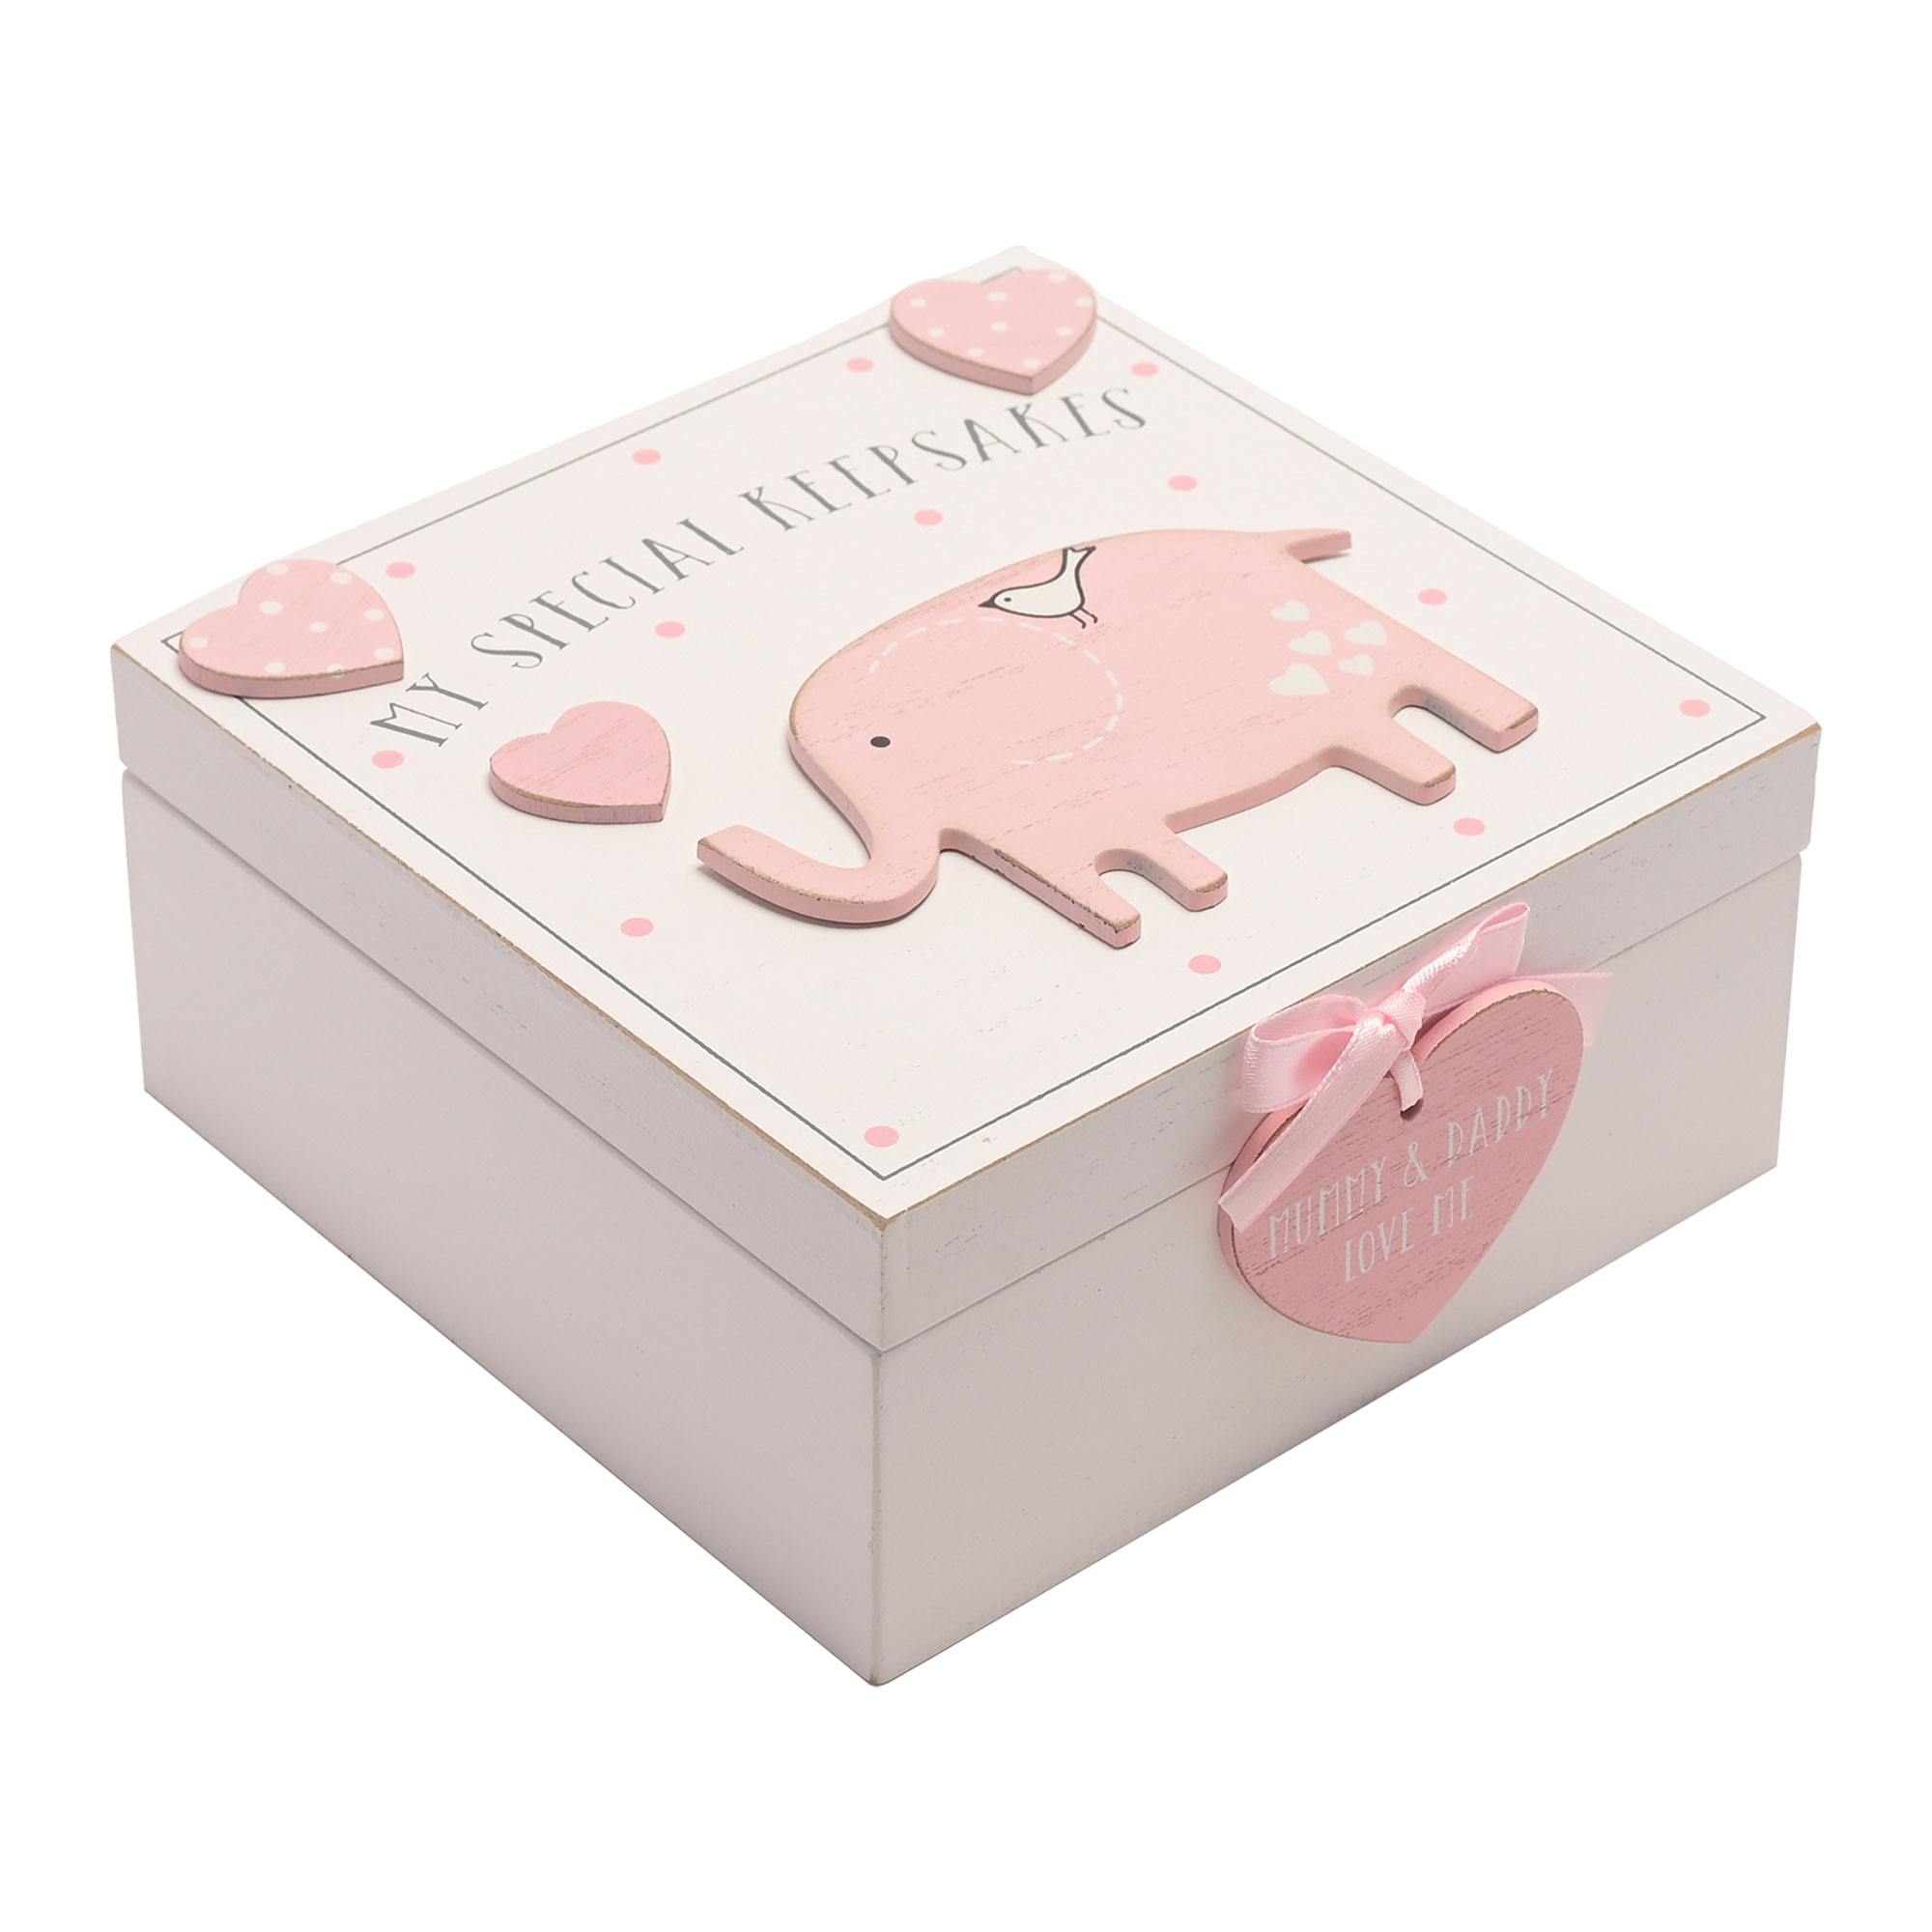 Pink Wooden My Special Keepsakes Box